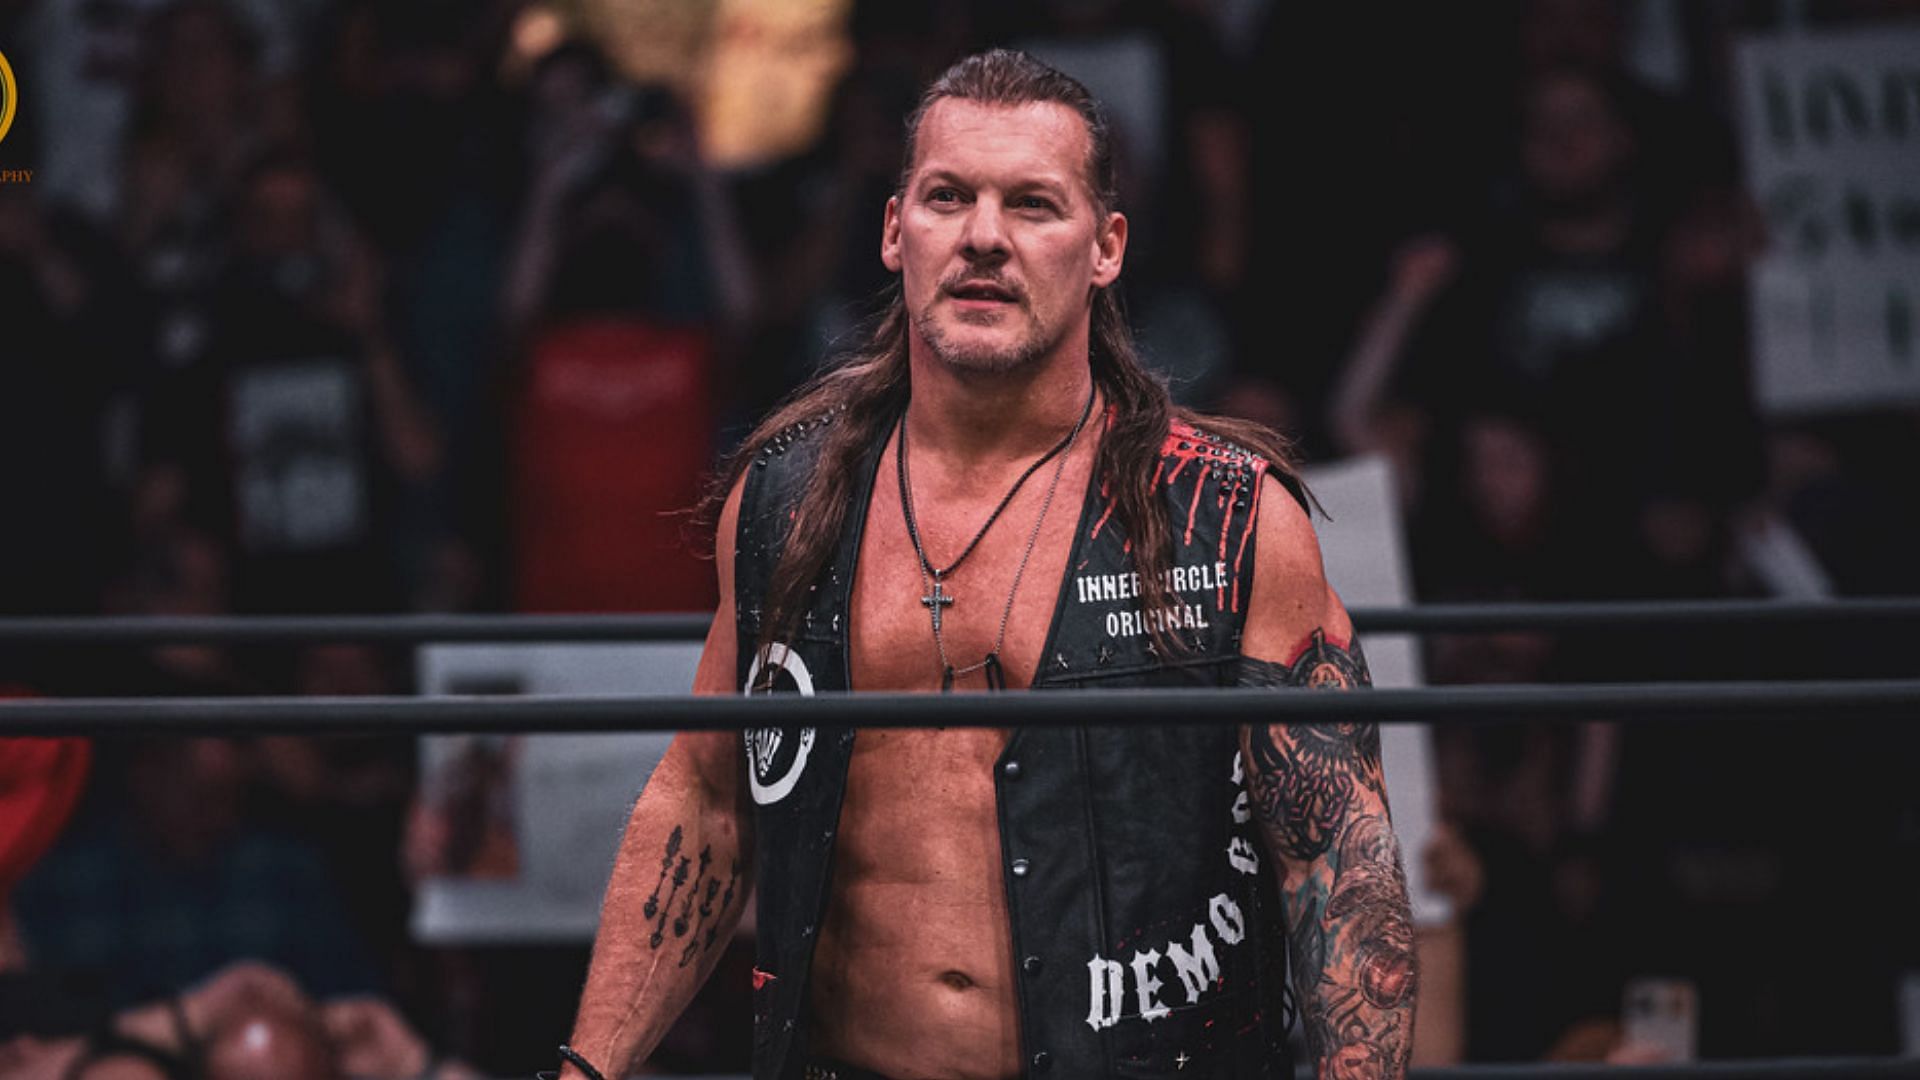 Chris Jericho at an AEW Dynamite event in 2022.